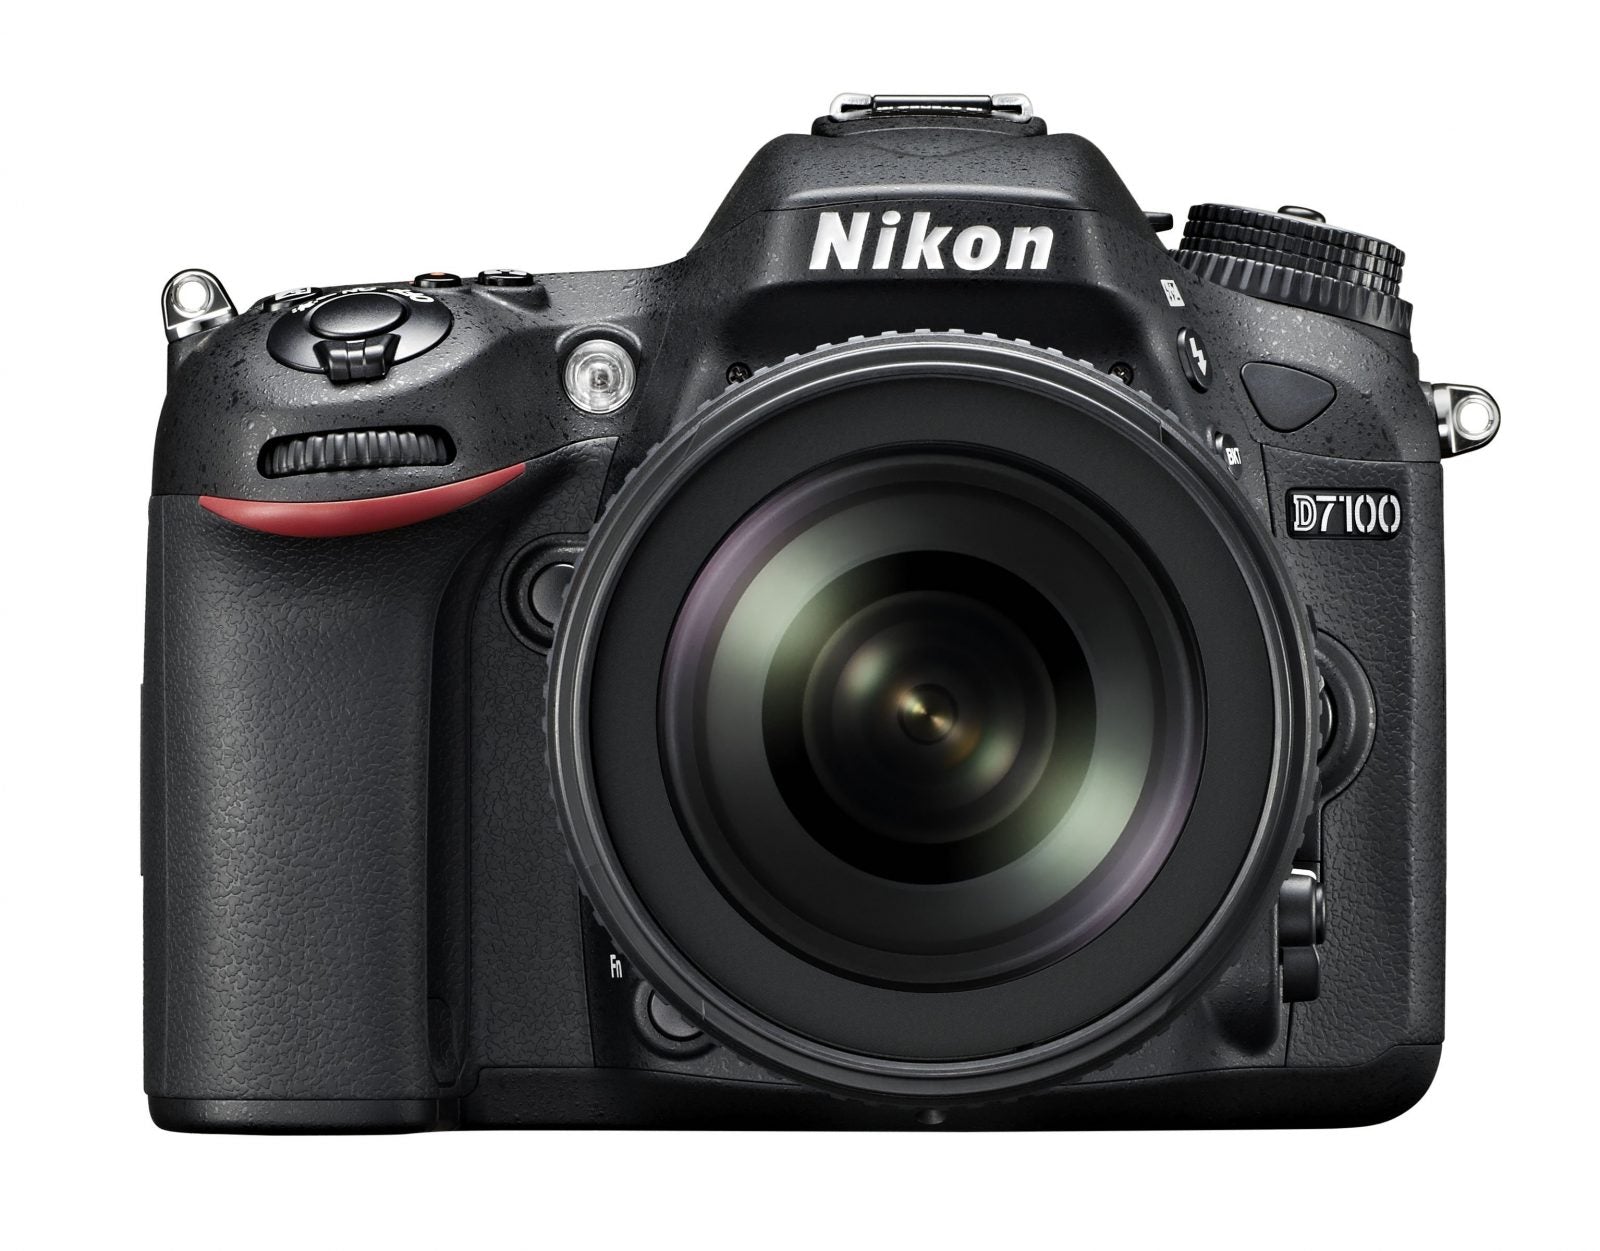 Introducing the Nikon D7100: Agility, Amazing Image Quality, and Wireless Connectivity